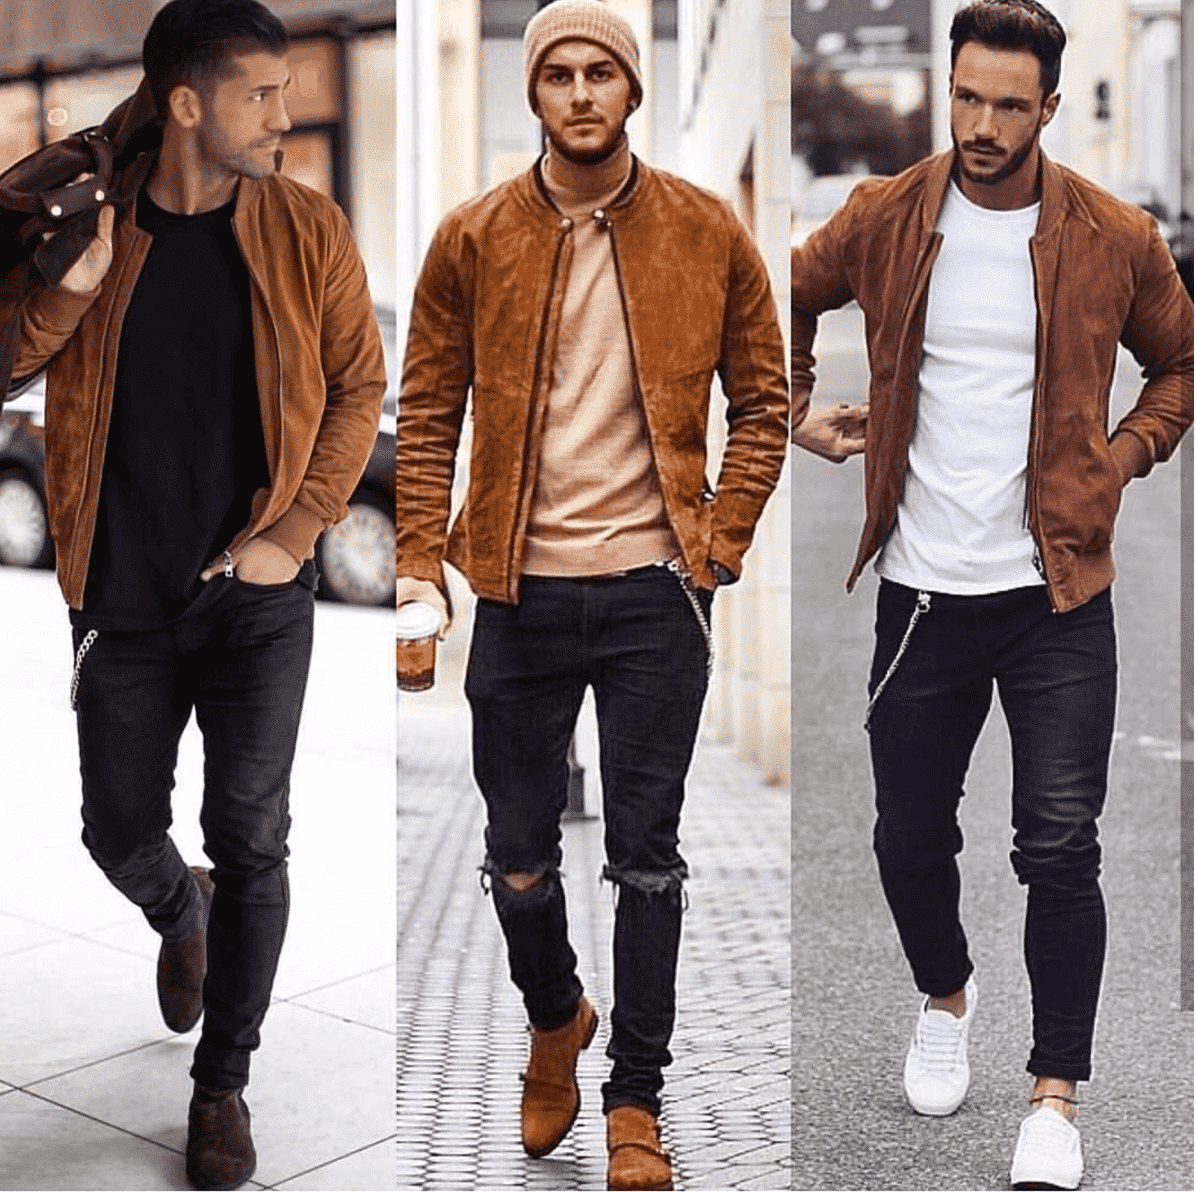 17 Most Popular Street Style Fashion Ideas for Men 2018